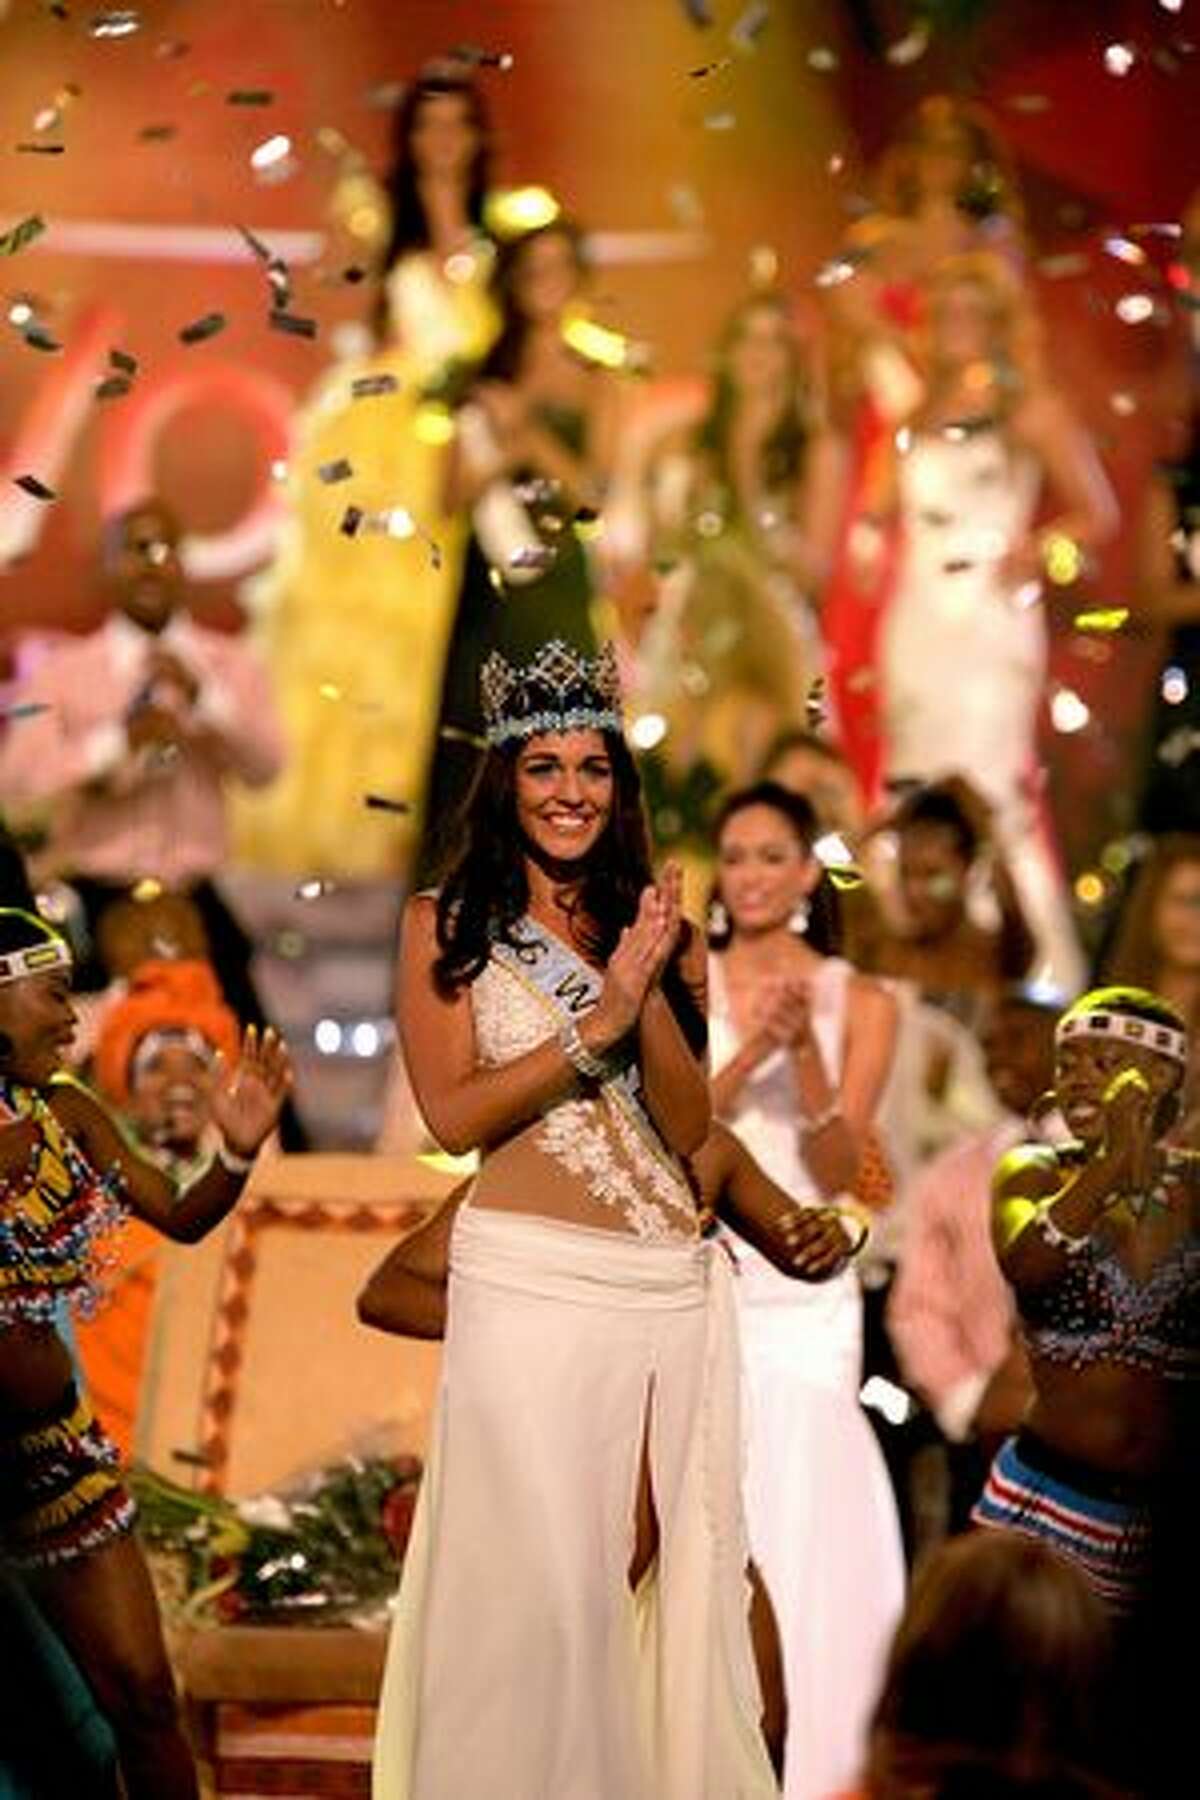 Miss Gibraltar Kaiane Aldorino is crowned Miss World 2009 at Gallagher Convention Center in Johannesburg, South Africa.